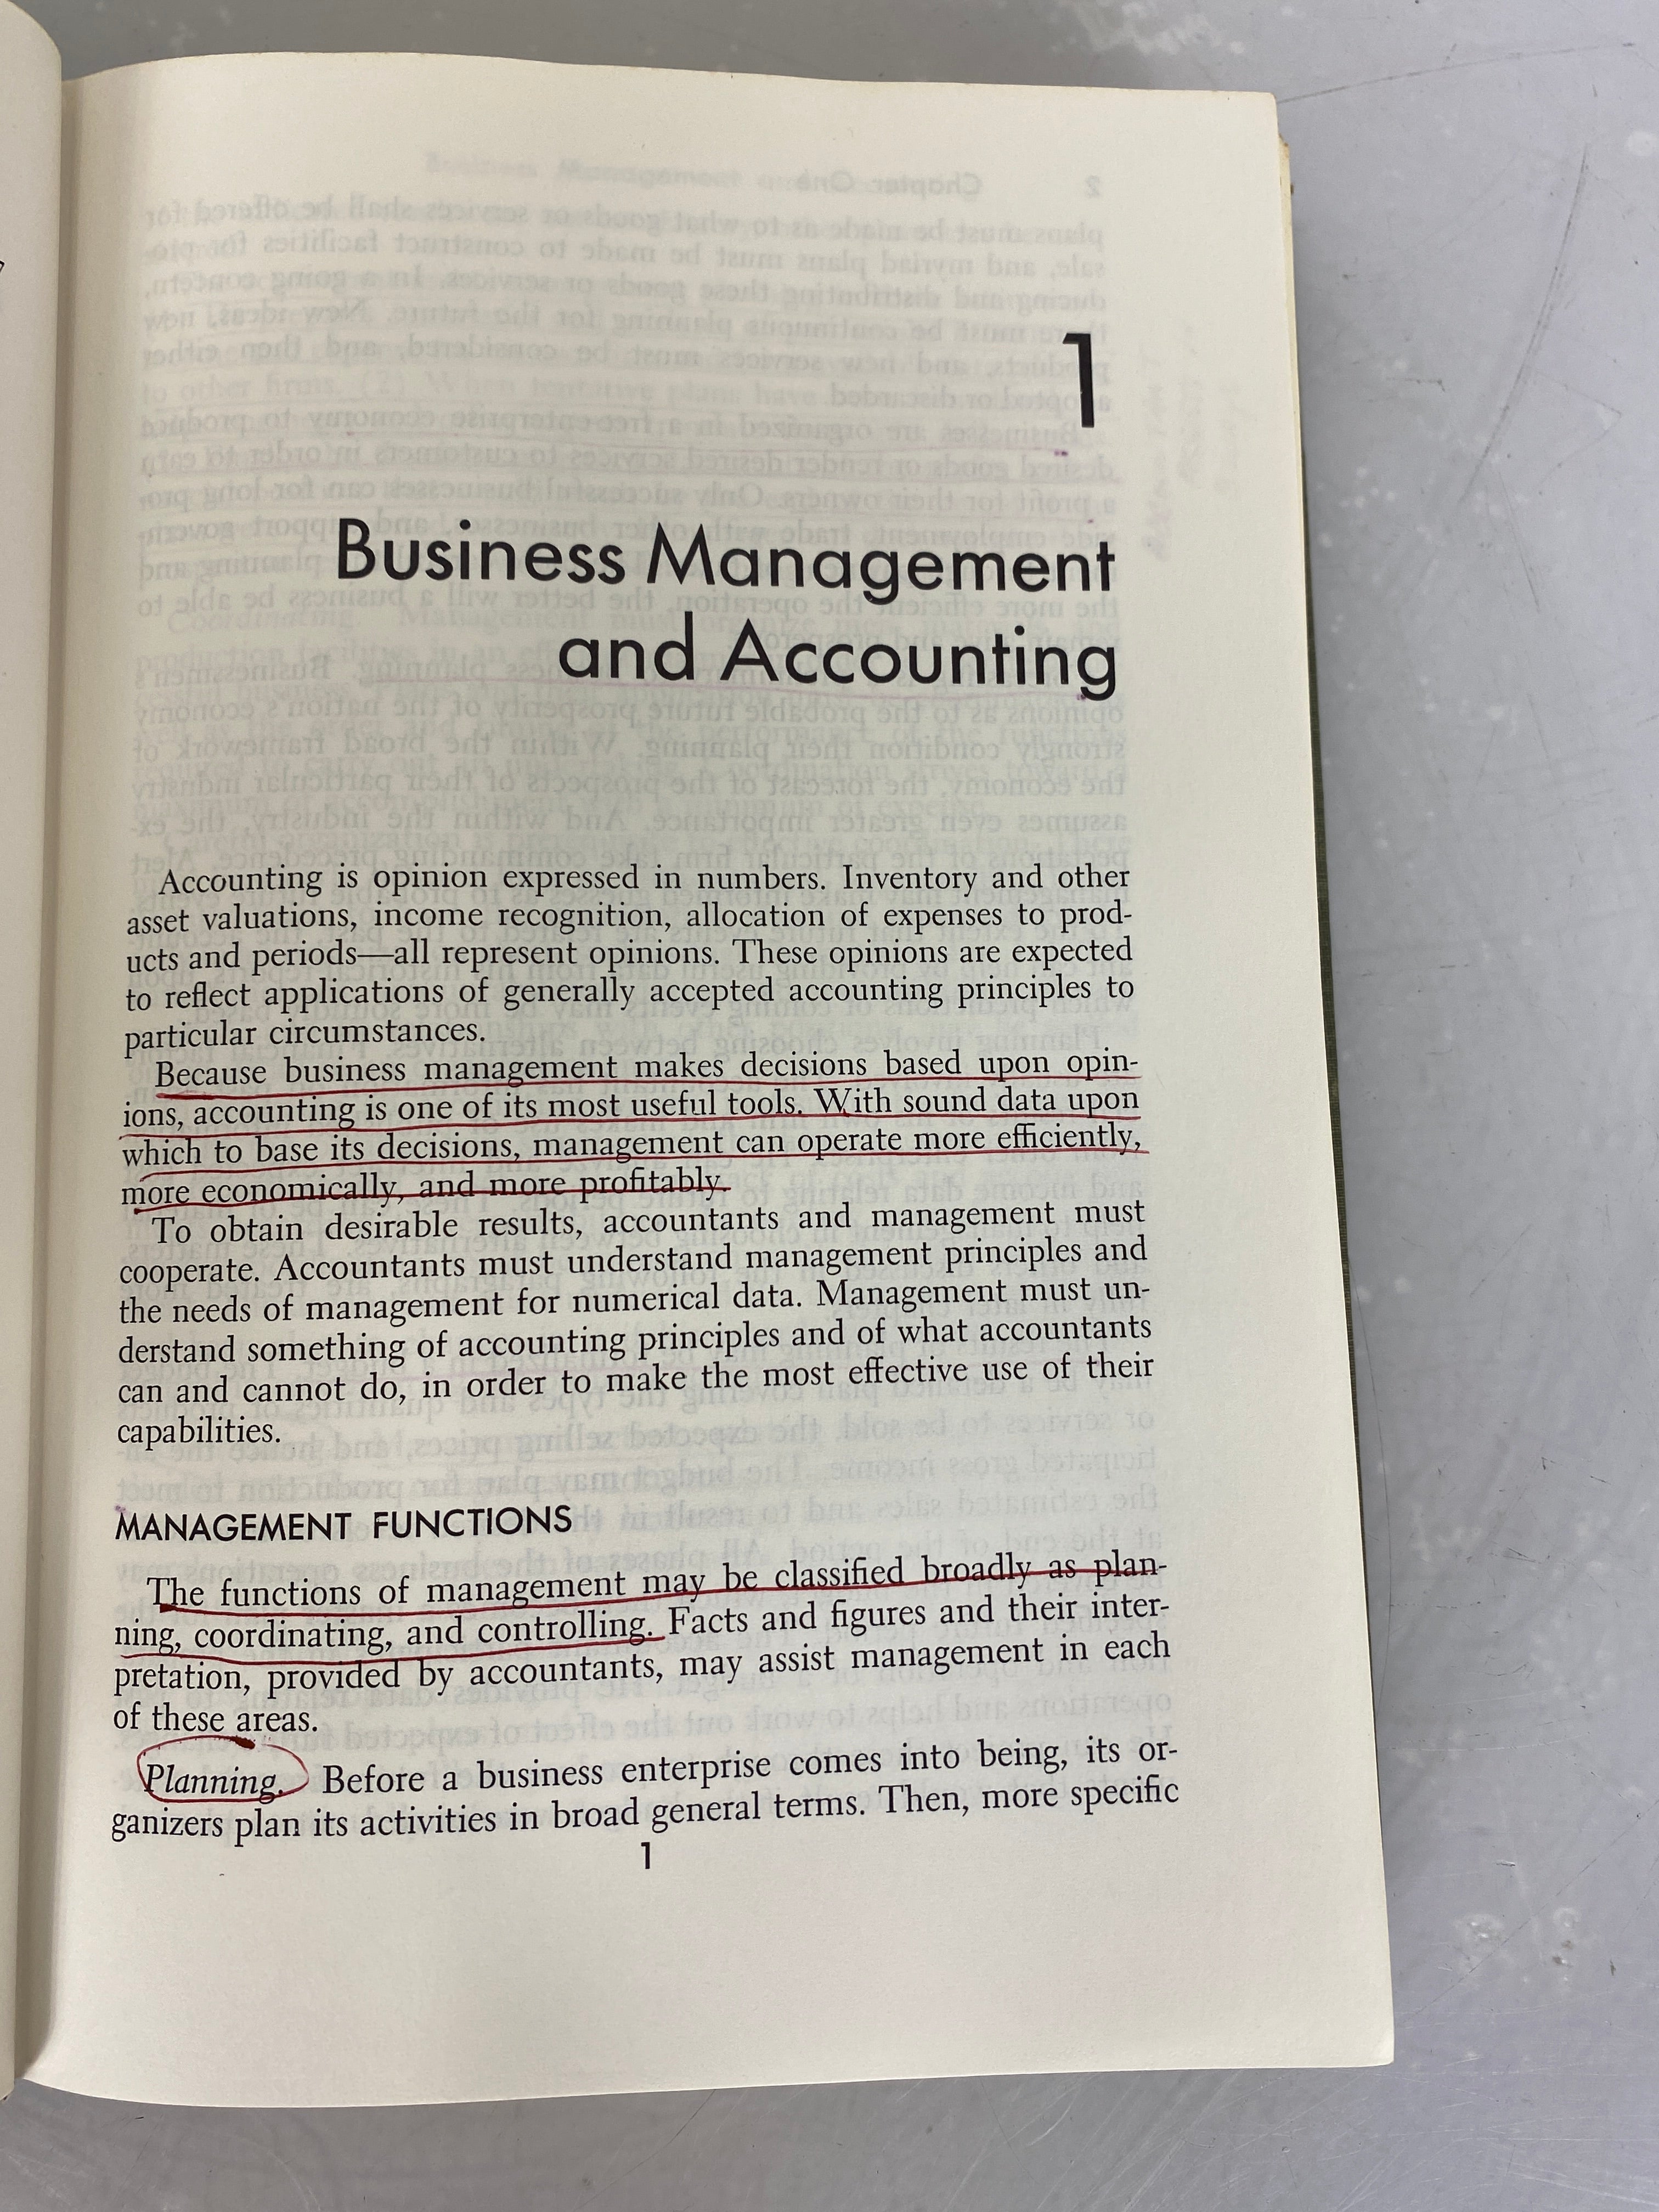 Using Accounting in Business by Voorhis, Dunn, and McCameron 1962 HC